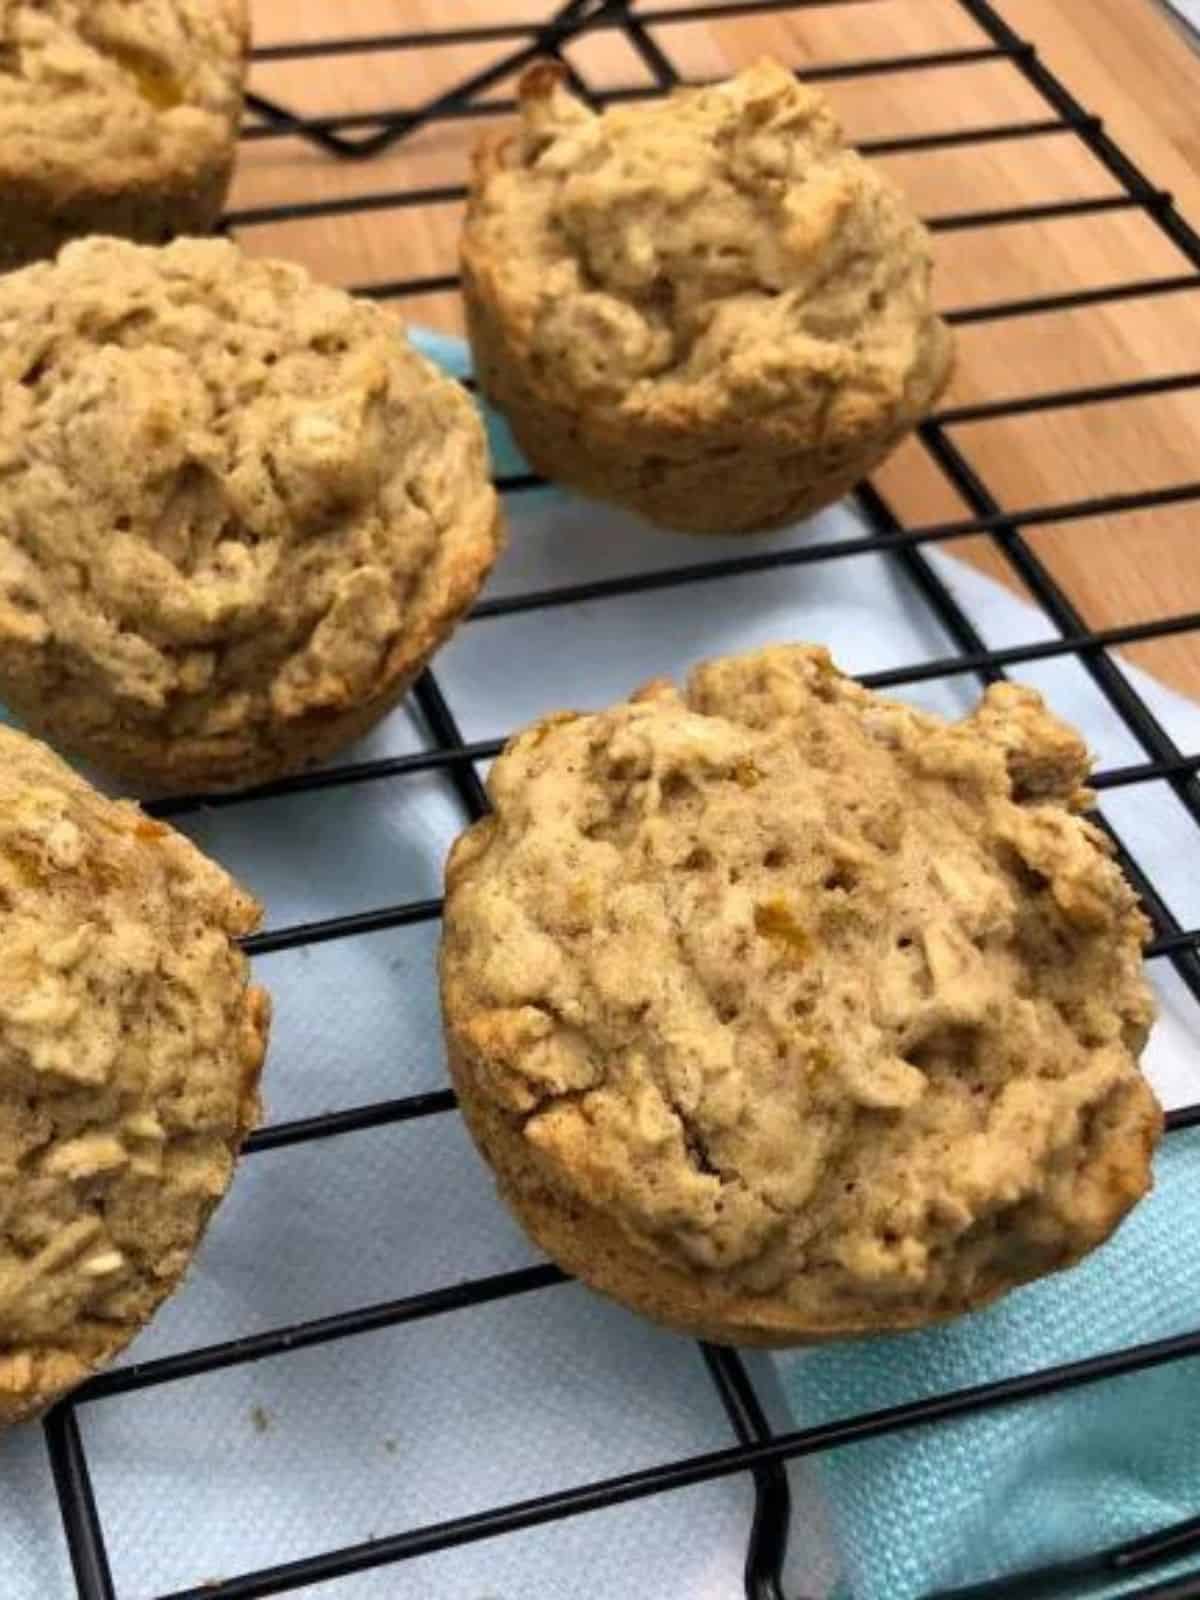 peach oatmeal muffins on a black wire rack with a blue and white cloth underneath it.